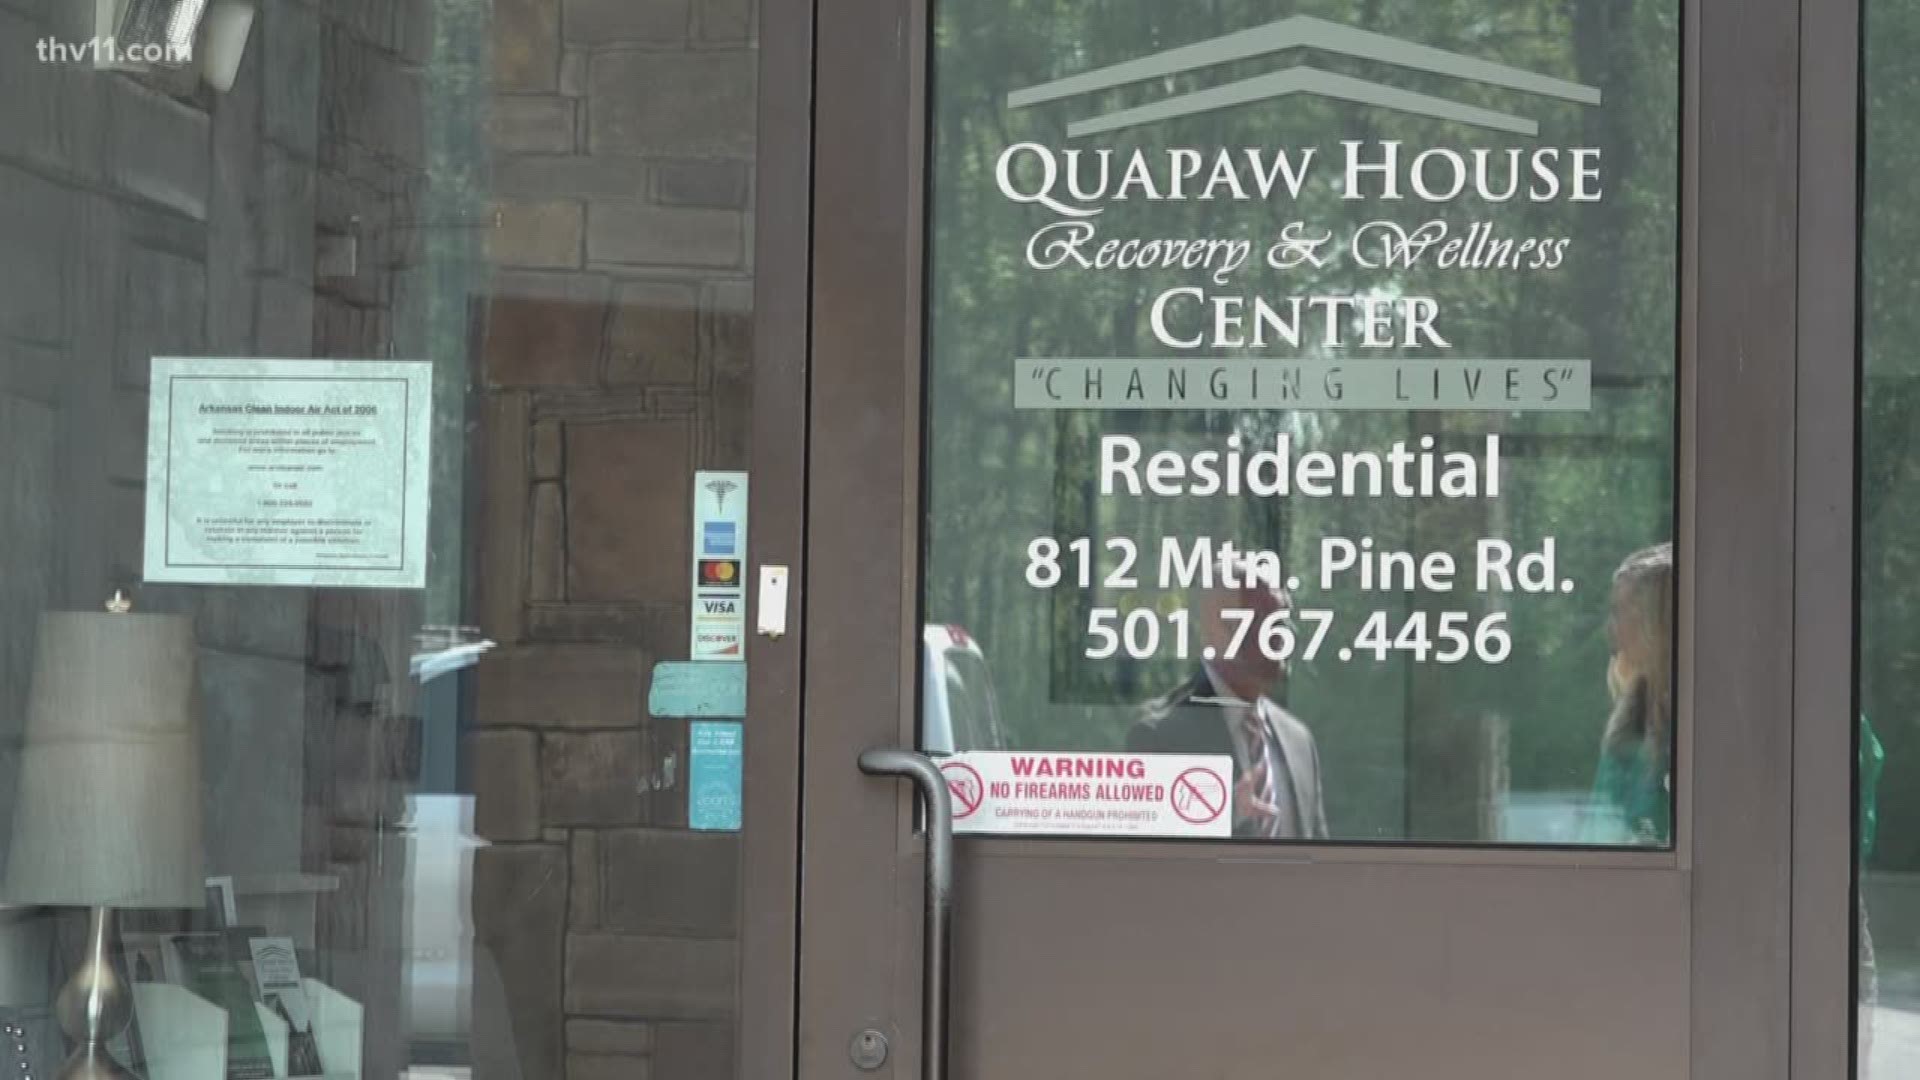 THV11's Winnie Wright was at Quapaw House Tuesday, reporting on the lack of rehab facilities available in Arkansas. While there, she met a number of former addicts -- now working in recovery -- dedicating their lives to saving others from addiction.